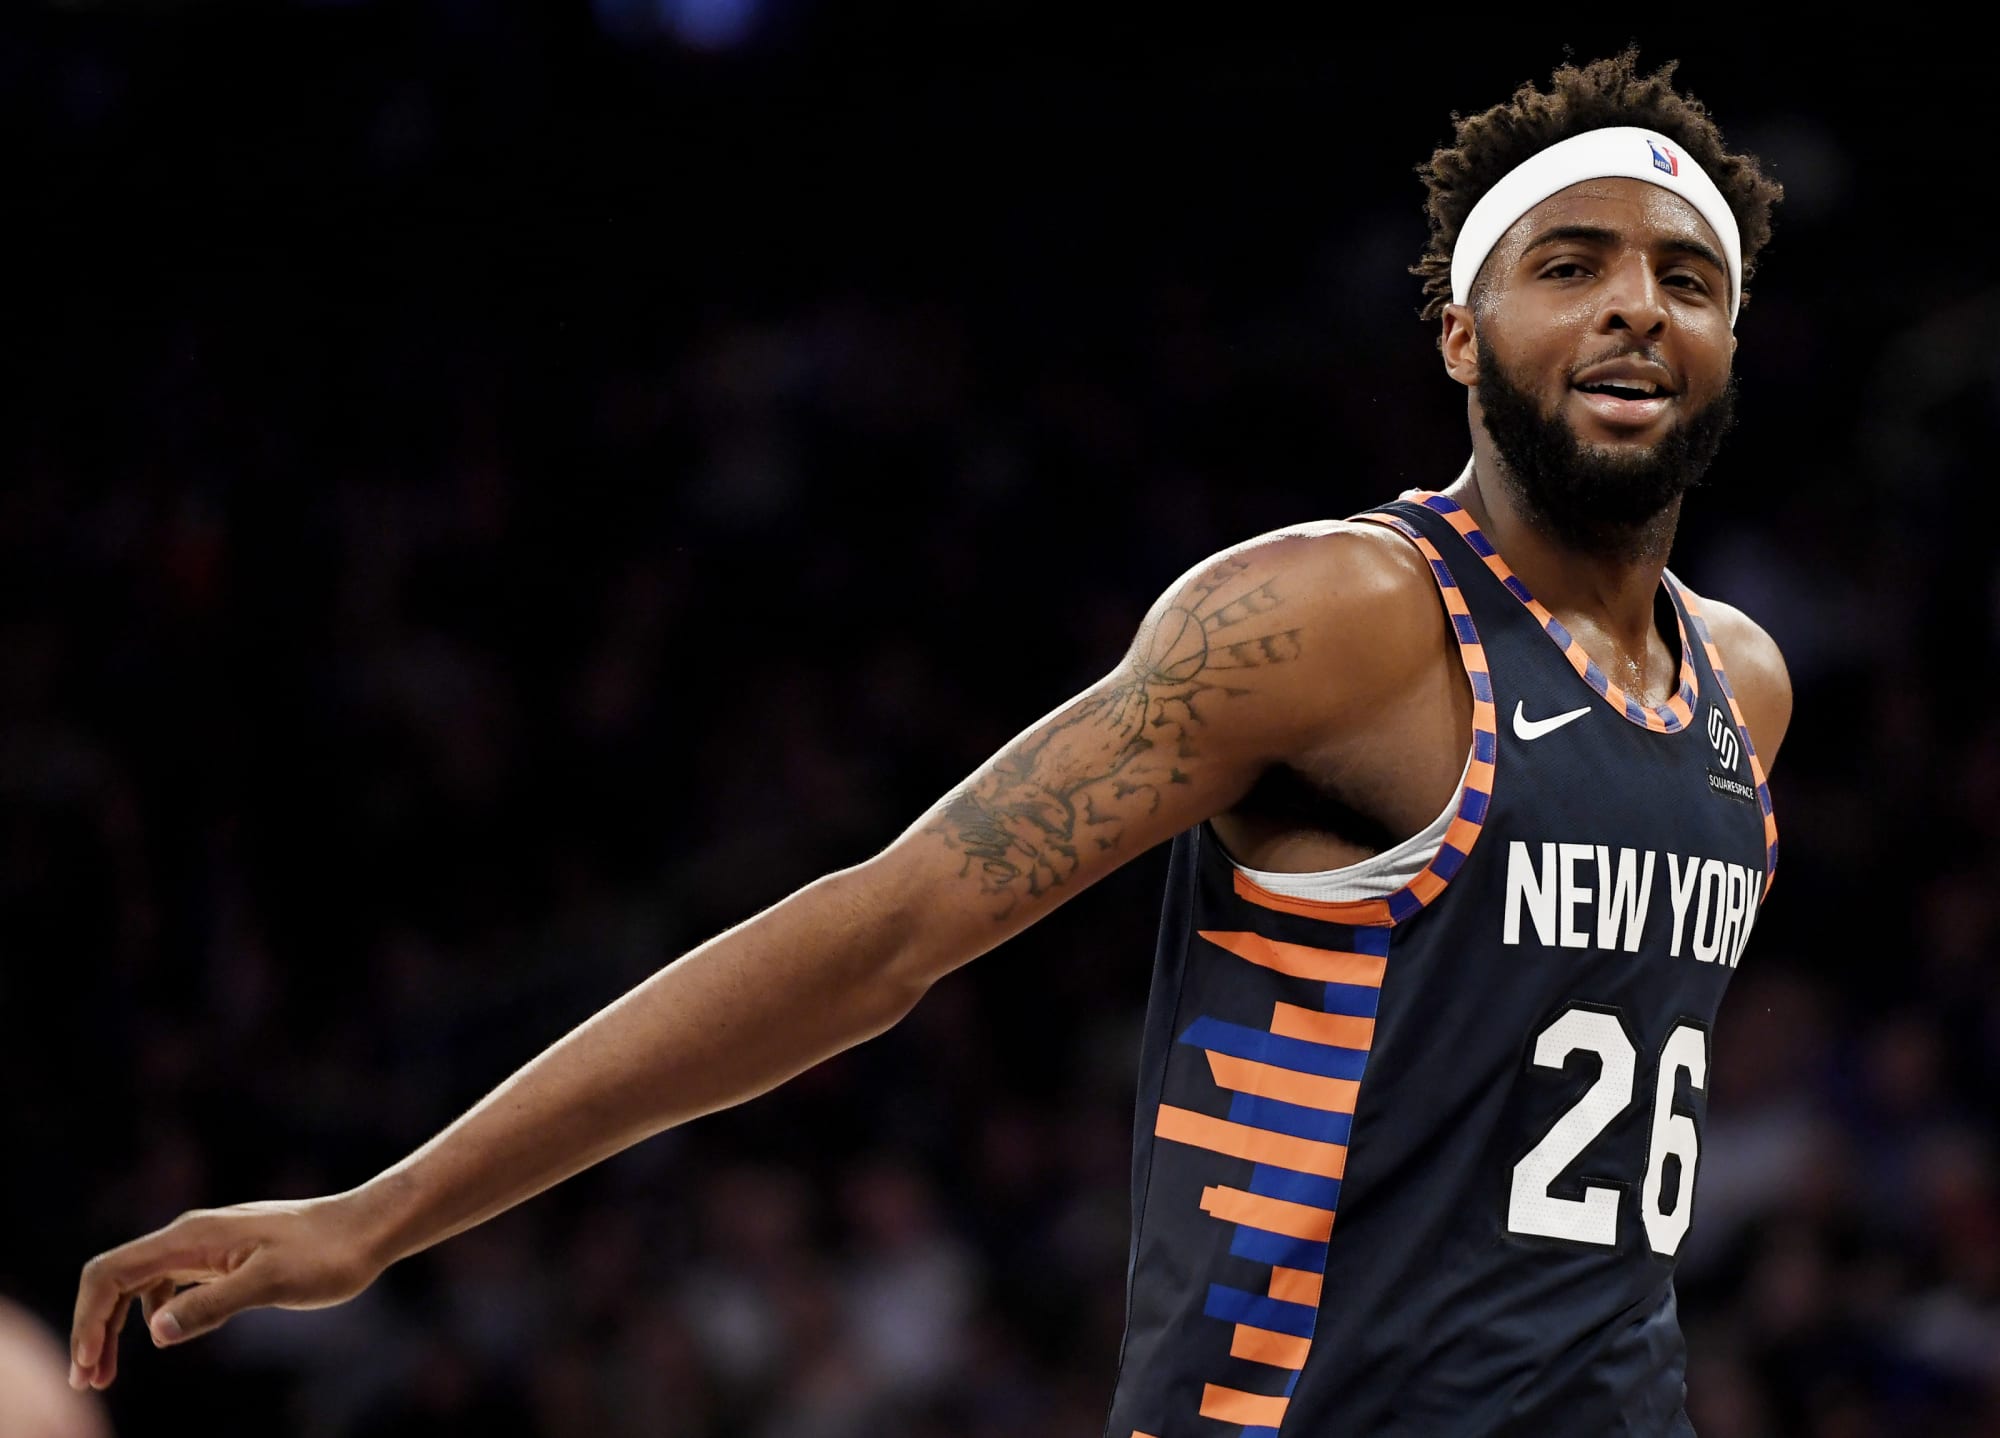 NBA 2K20 Rates New York Knicks and Cleveland Cavaliers Higher Than